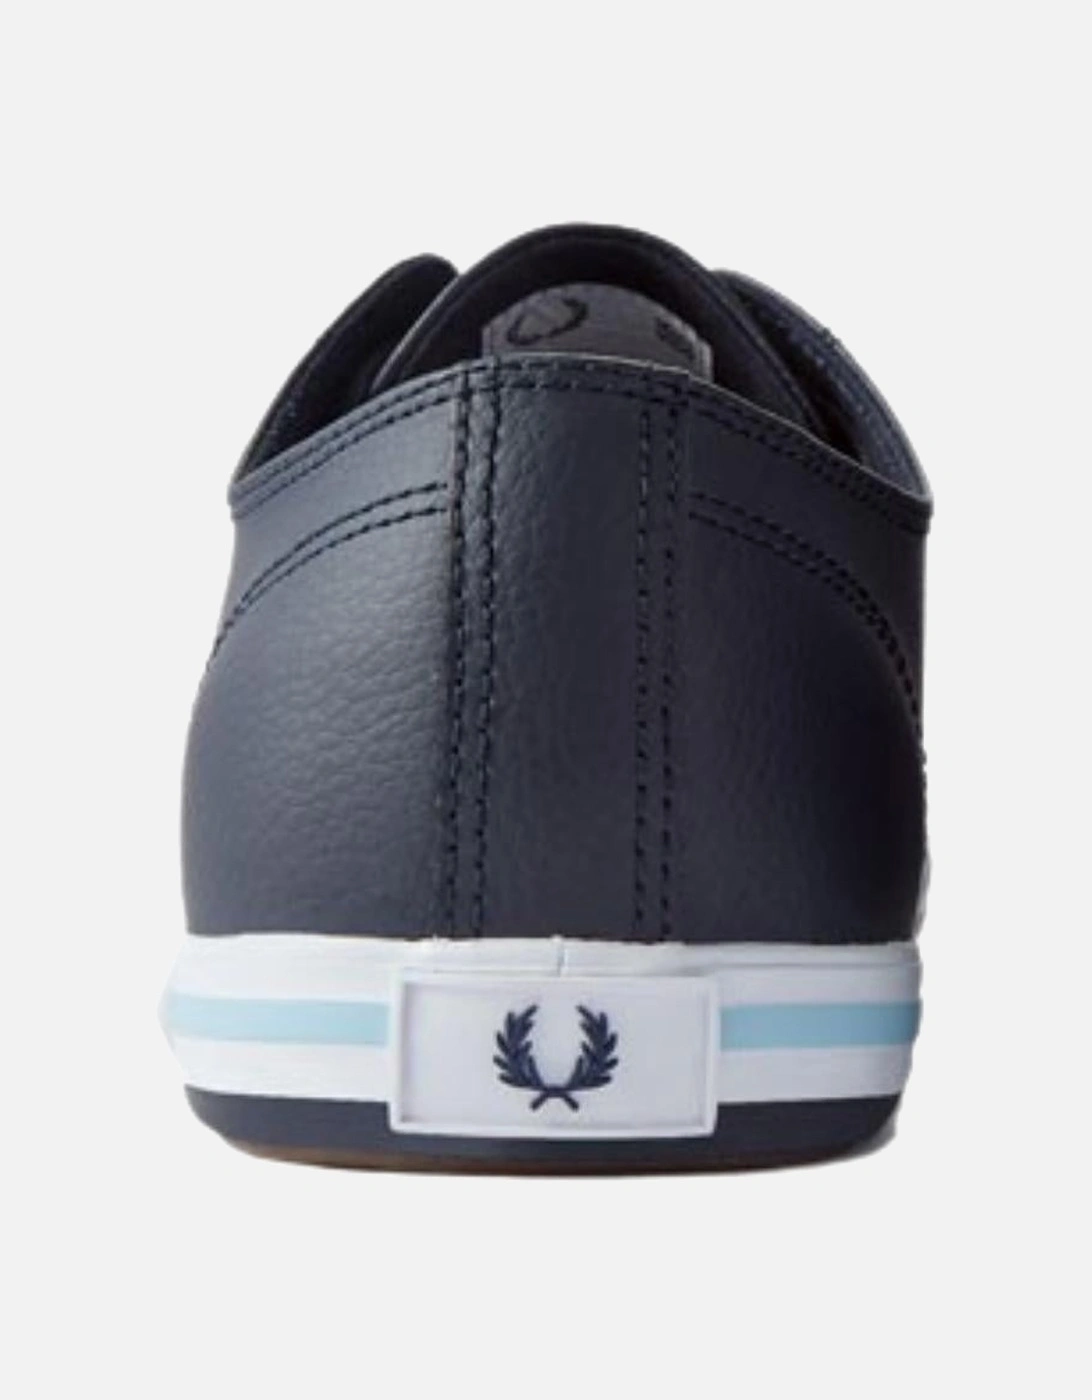 Kingston Leather B7163 608 Navy Blue Trainers